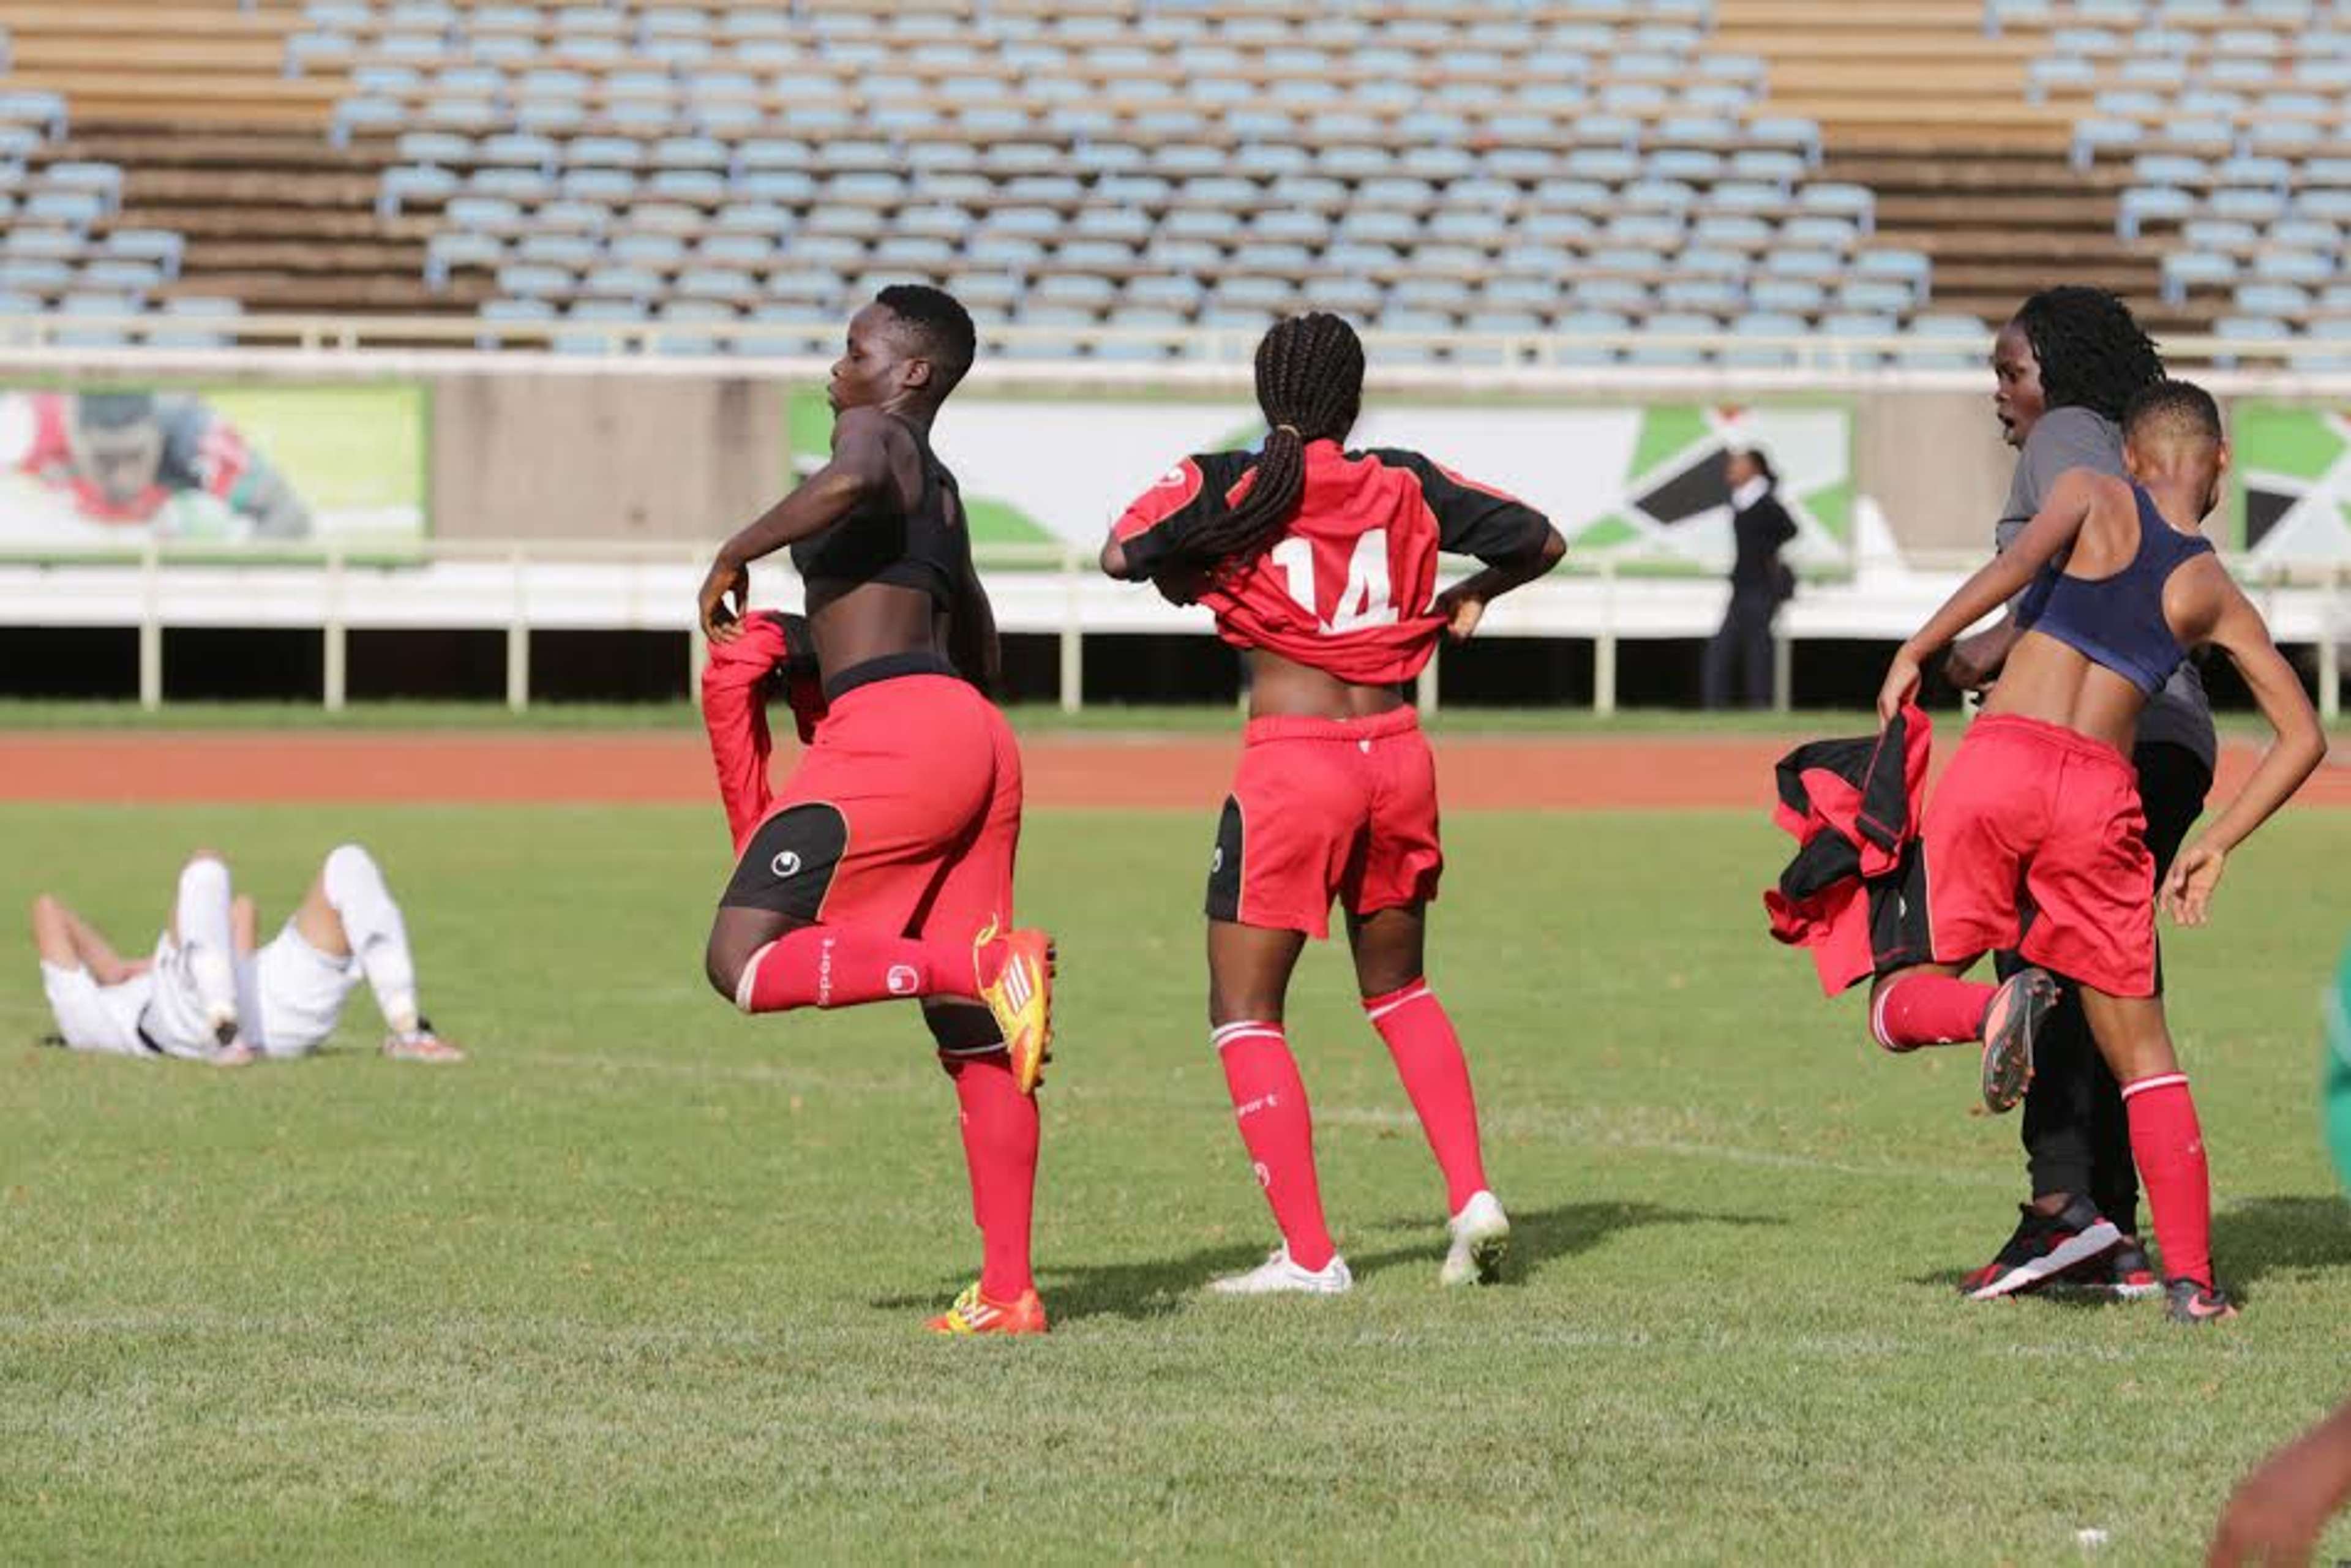 Harambee Starlets drew 1-1 with Algeria to qualify on goal aggregate having drawn 2-2 in Algiers